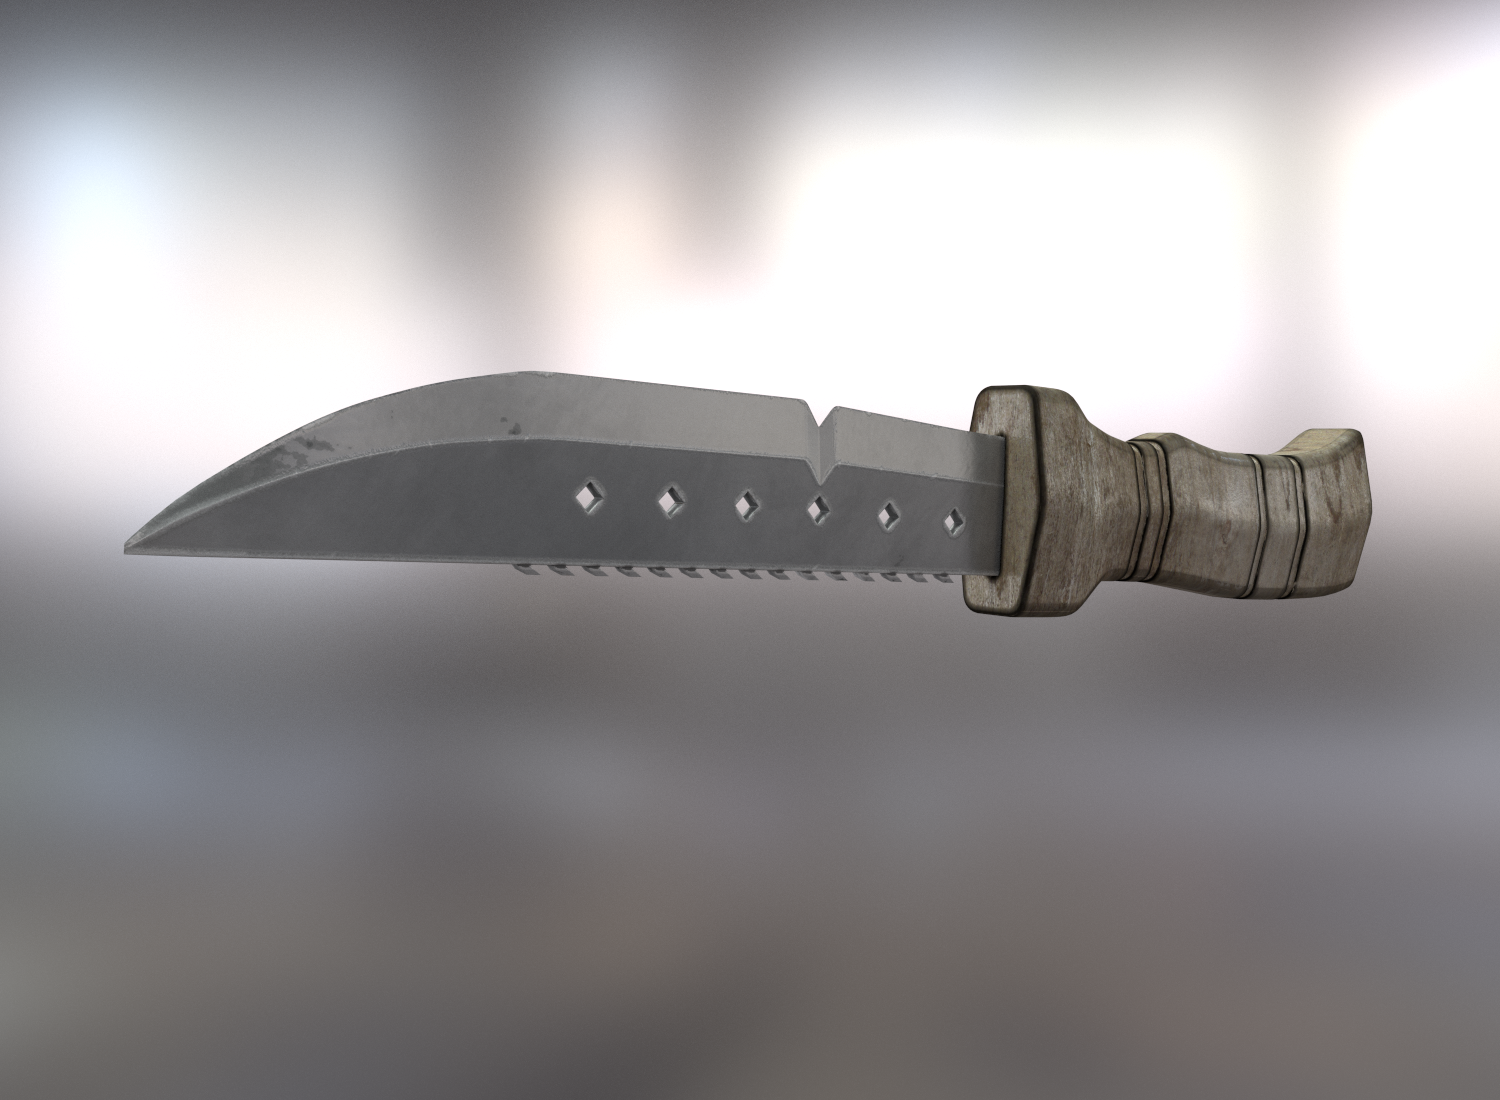 Combat knife from hell rust фото 1